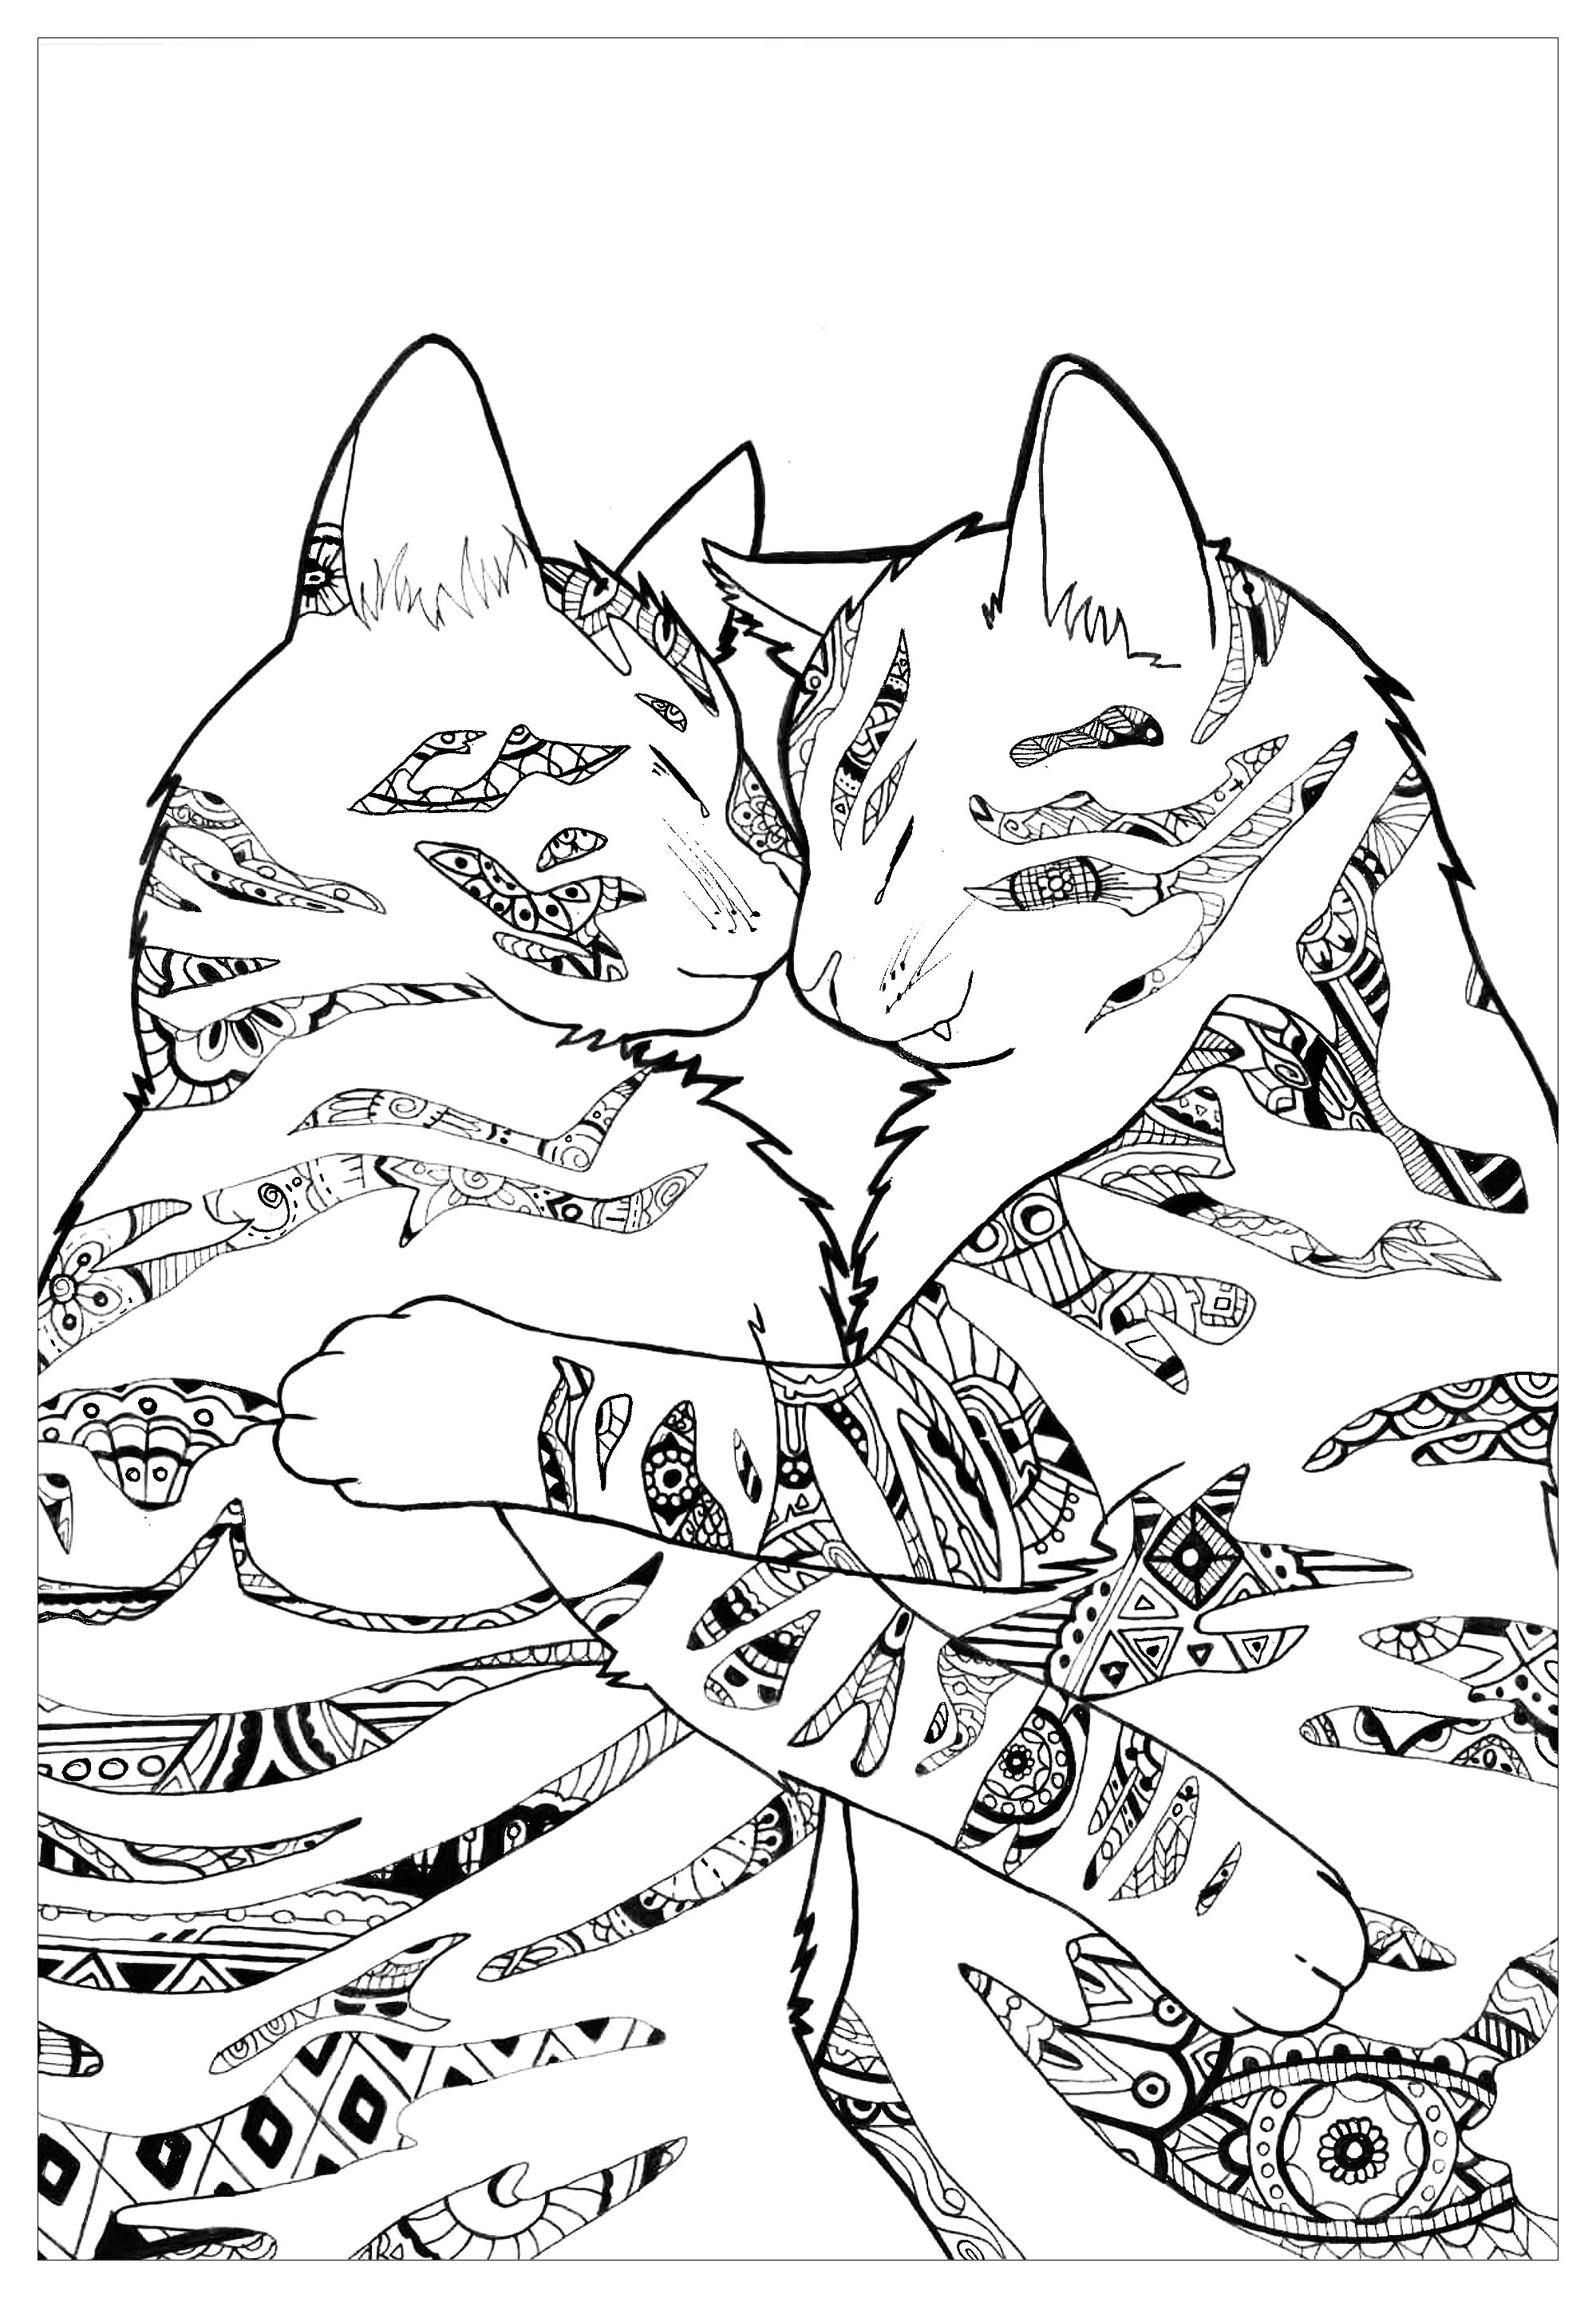 Simple Cats coloring page : Two cats playing